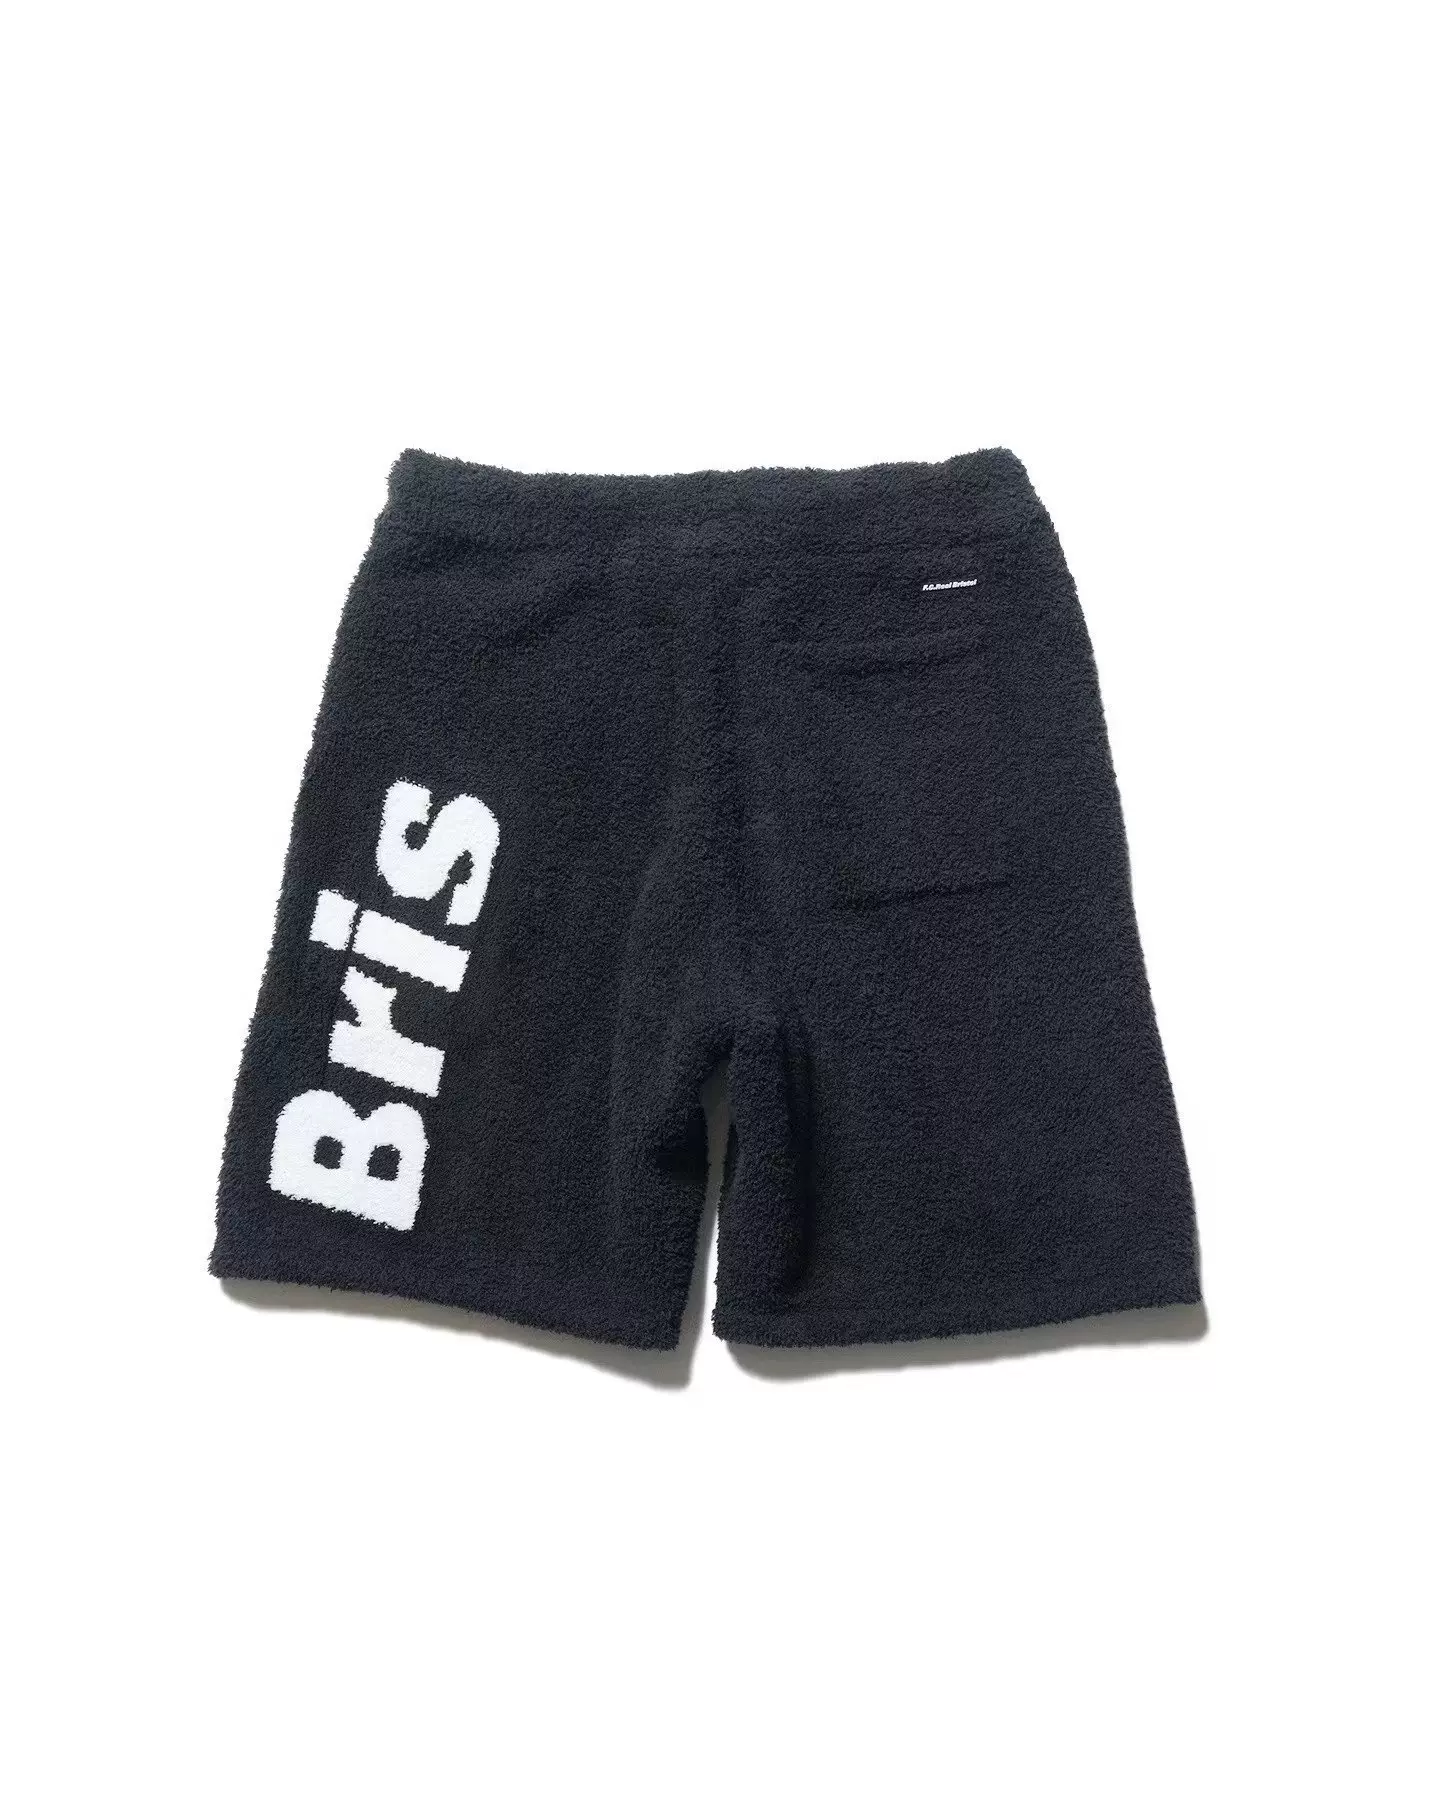 FCRB BAREFOOT DREAMS PILE SHORTS-